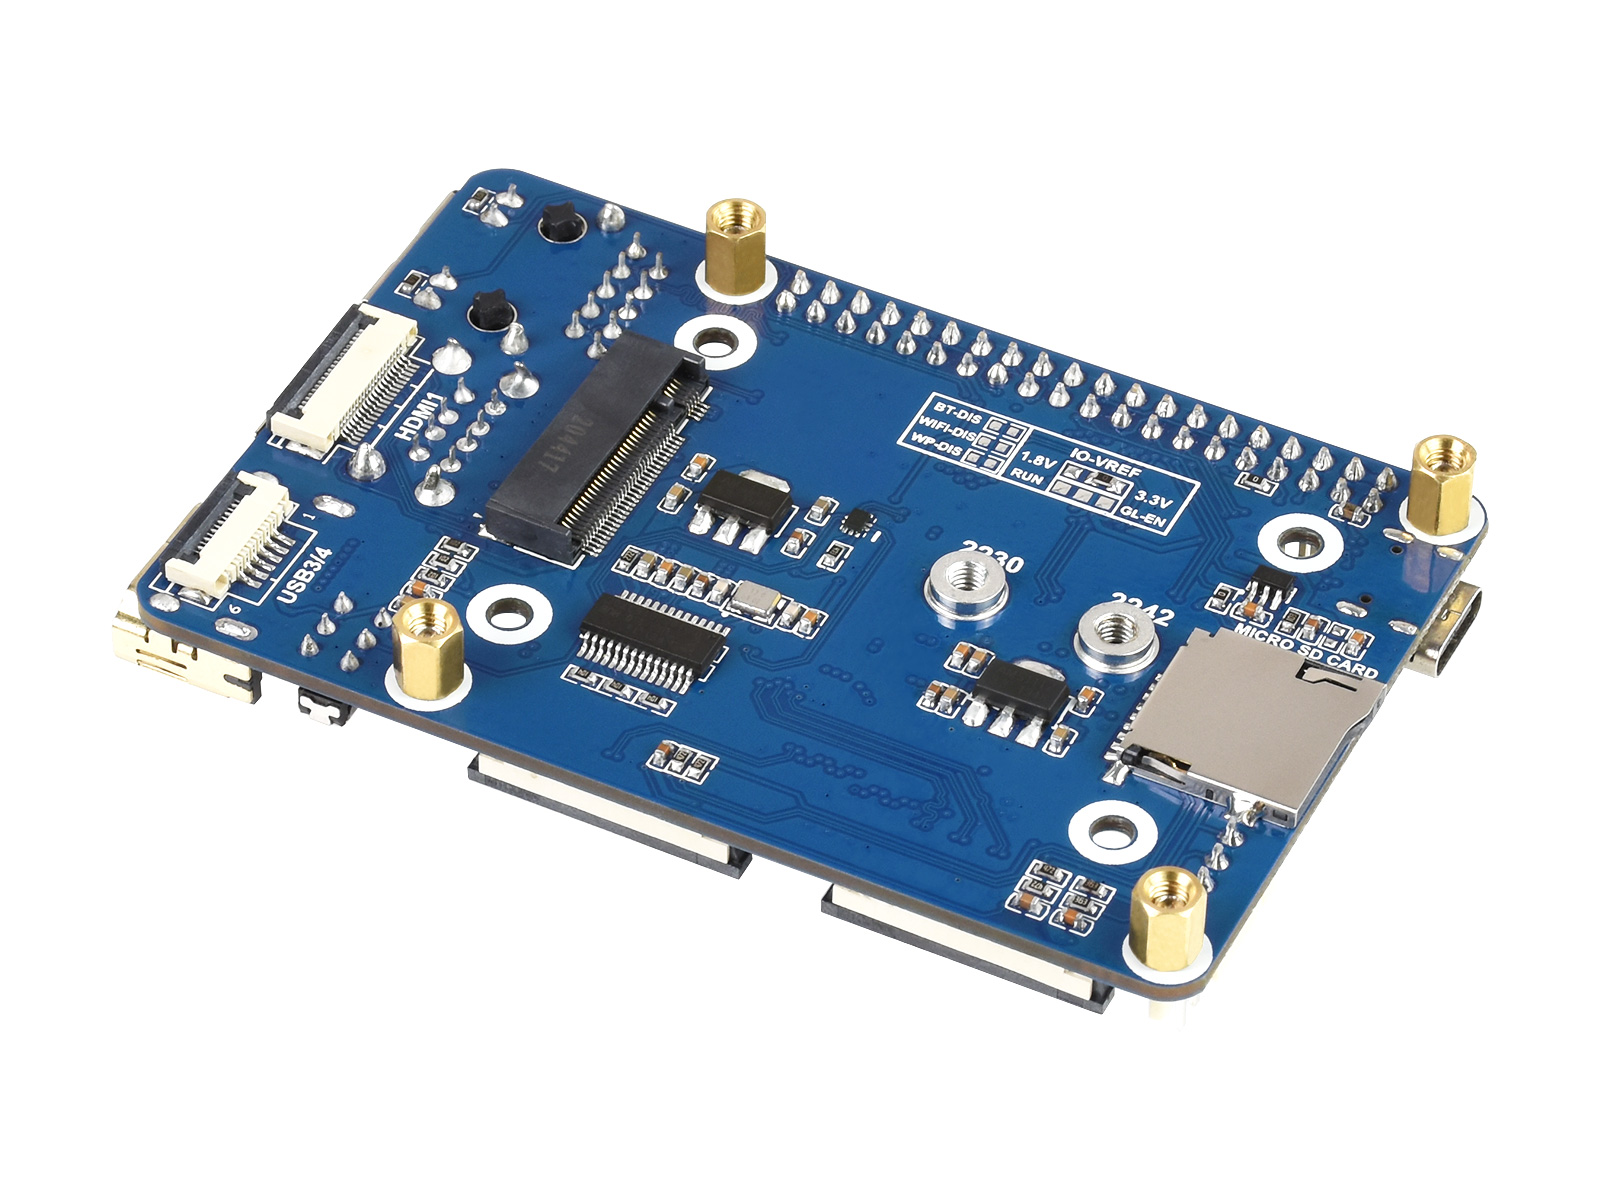 Waveshare launches Arduino-compatible CM4-Duino baseboard for RPi CM4 